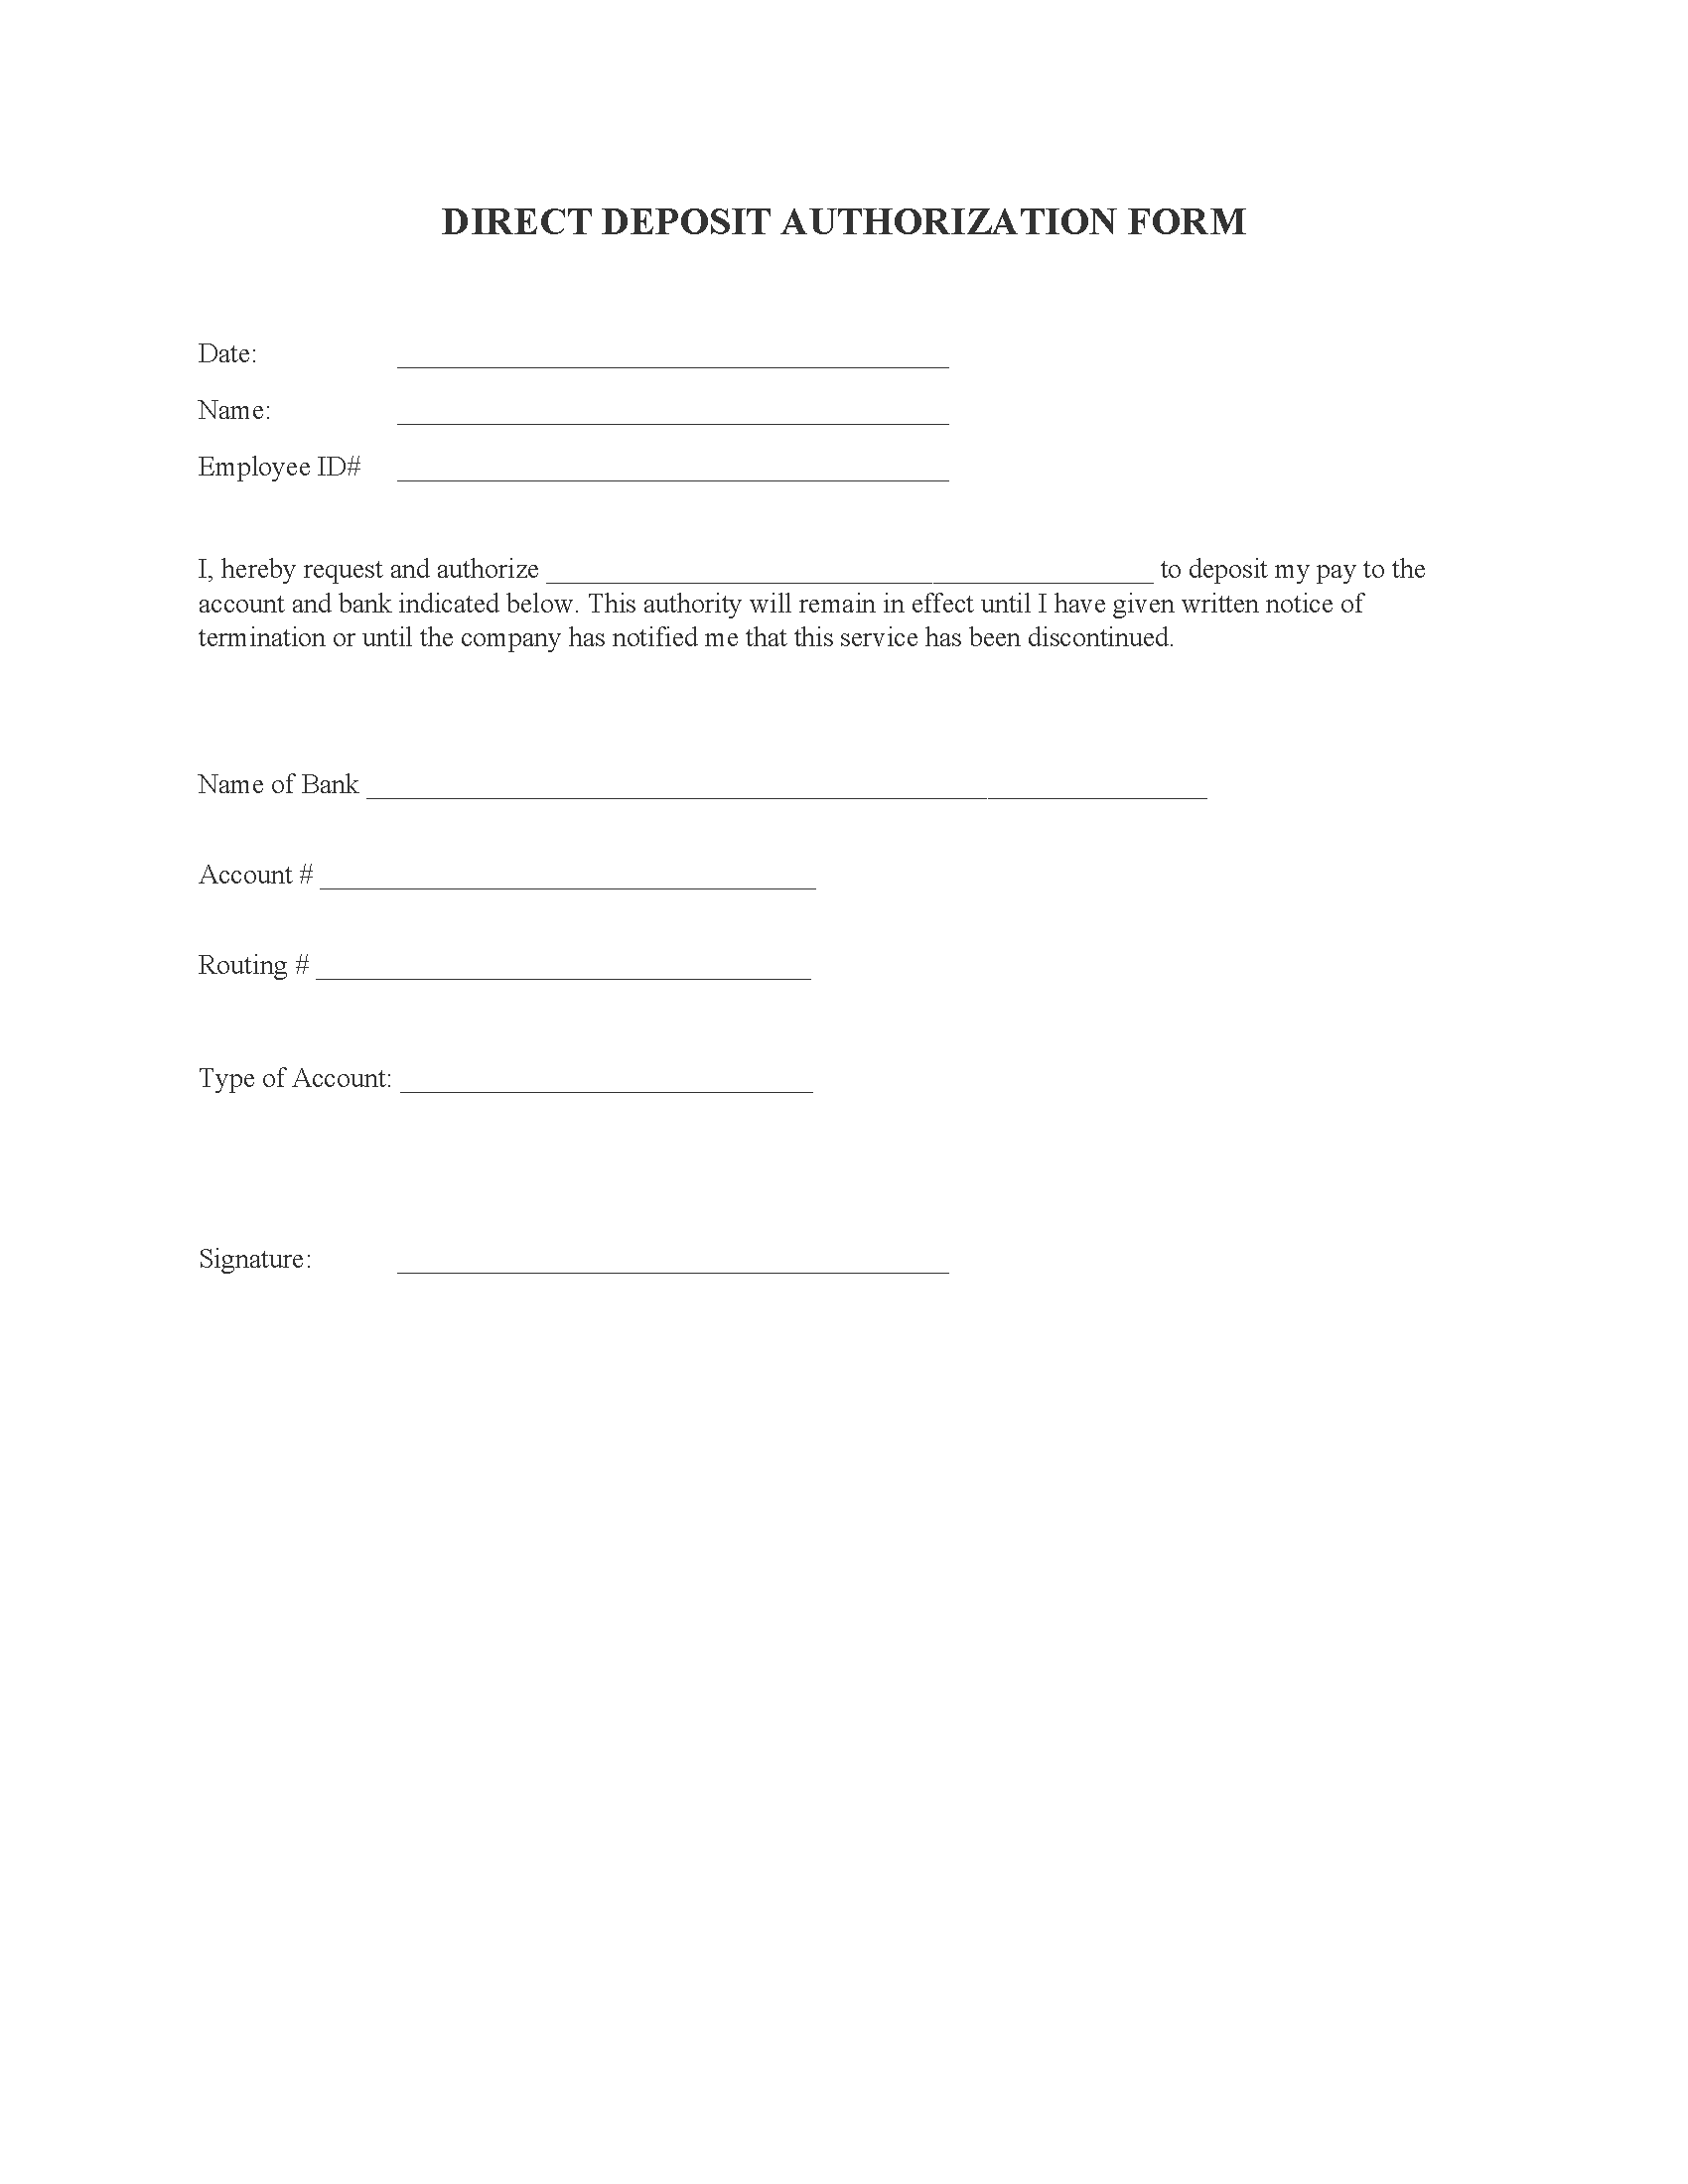 Direct Deposit Authorization Form Fillable PDF Free Printable Legal Forms